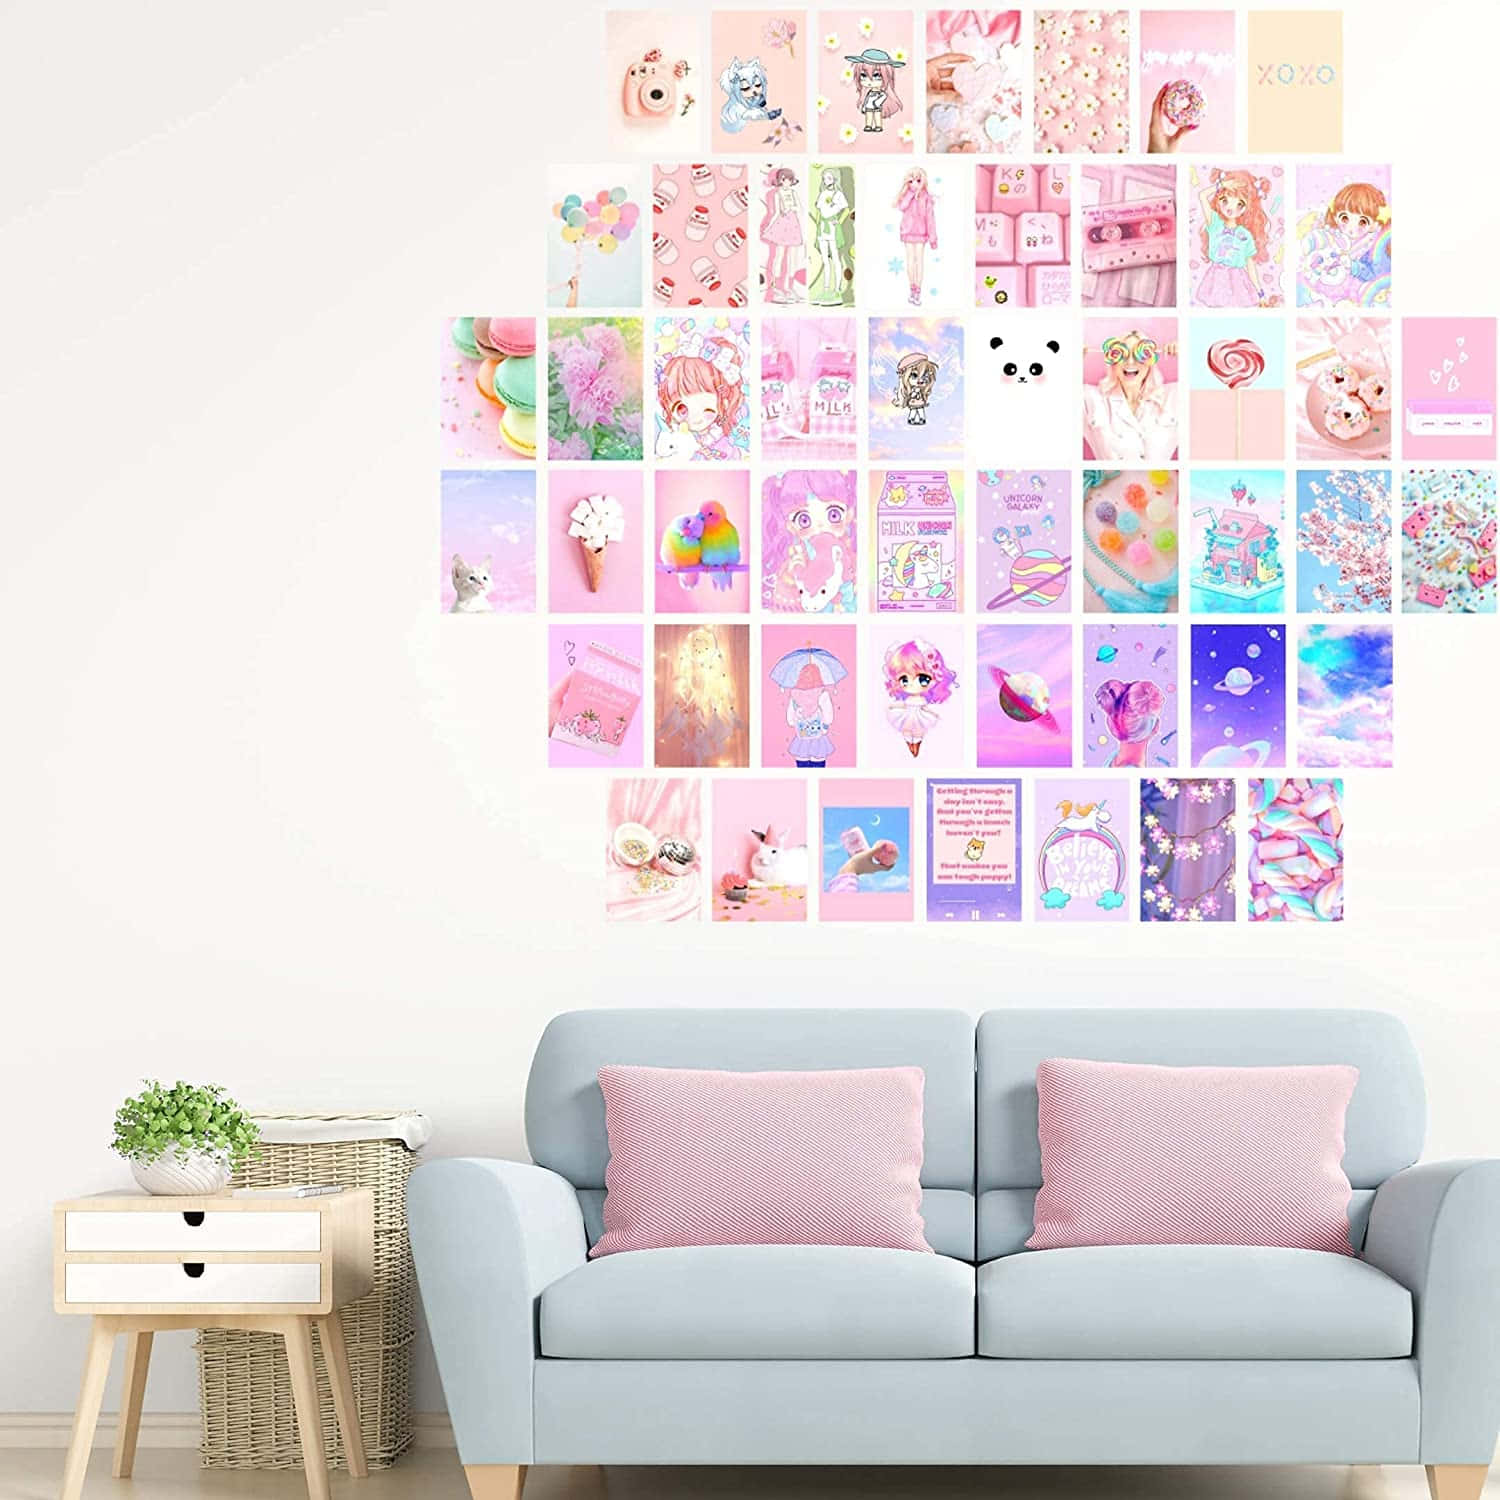 Adorable Kawaii-styled bedroom with colorful decorations and cozy atmosphere Wallpaper